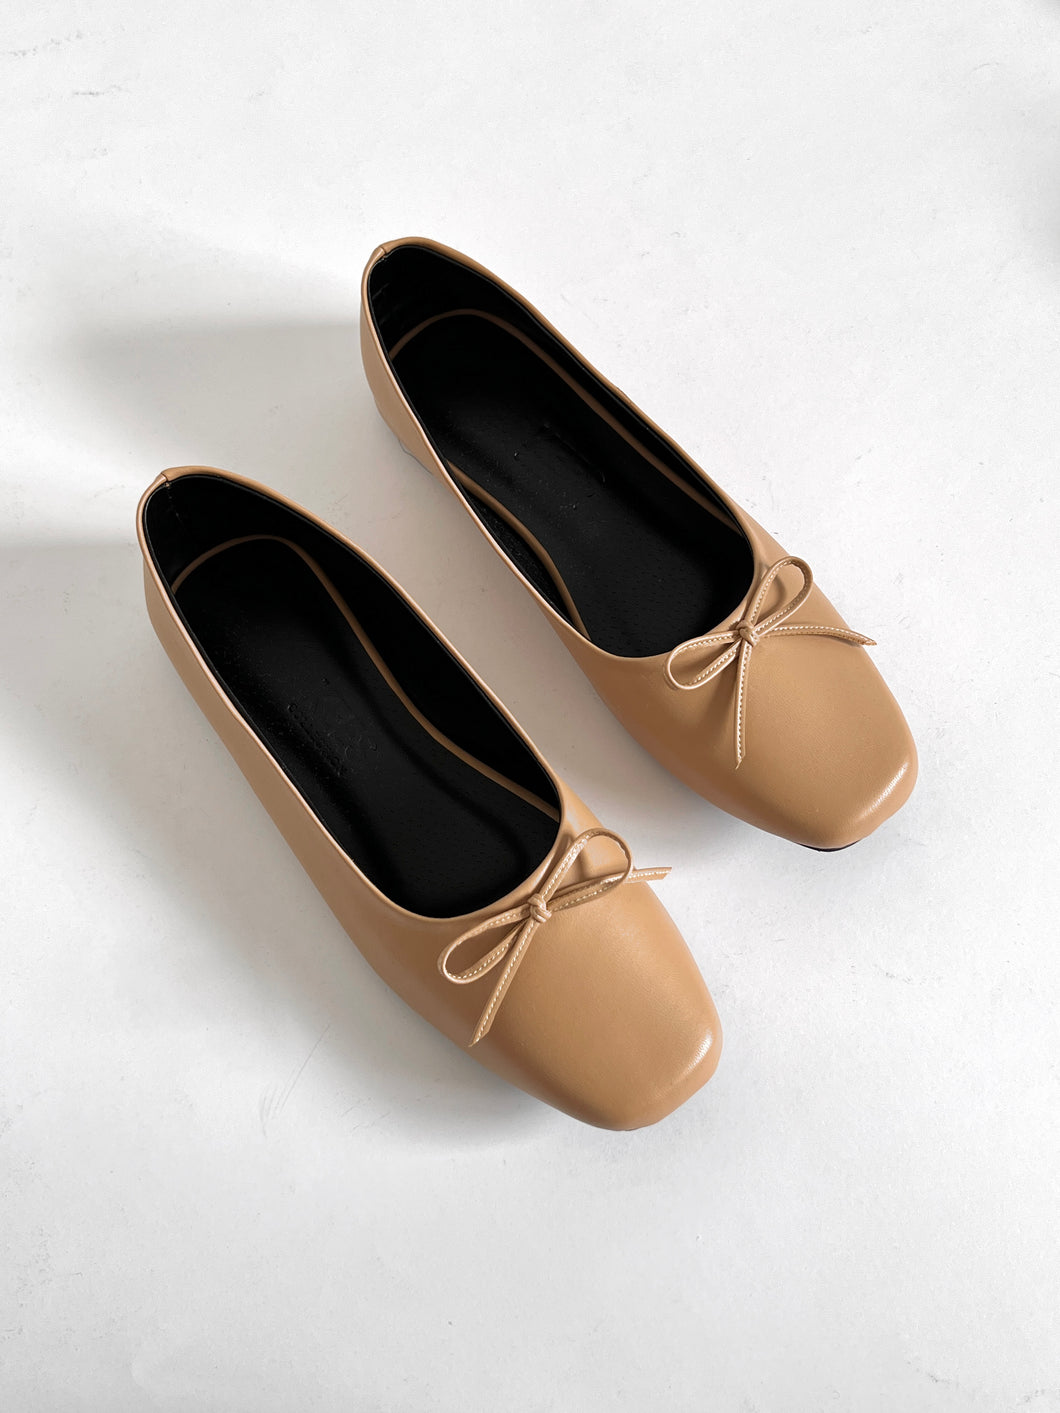 The Tali Shoes Beige